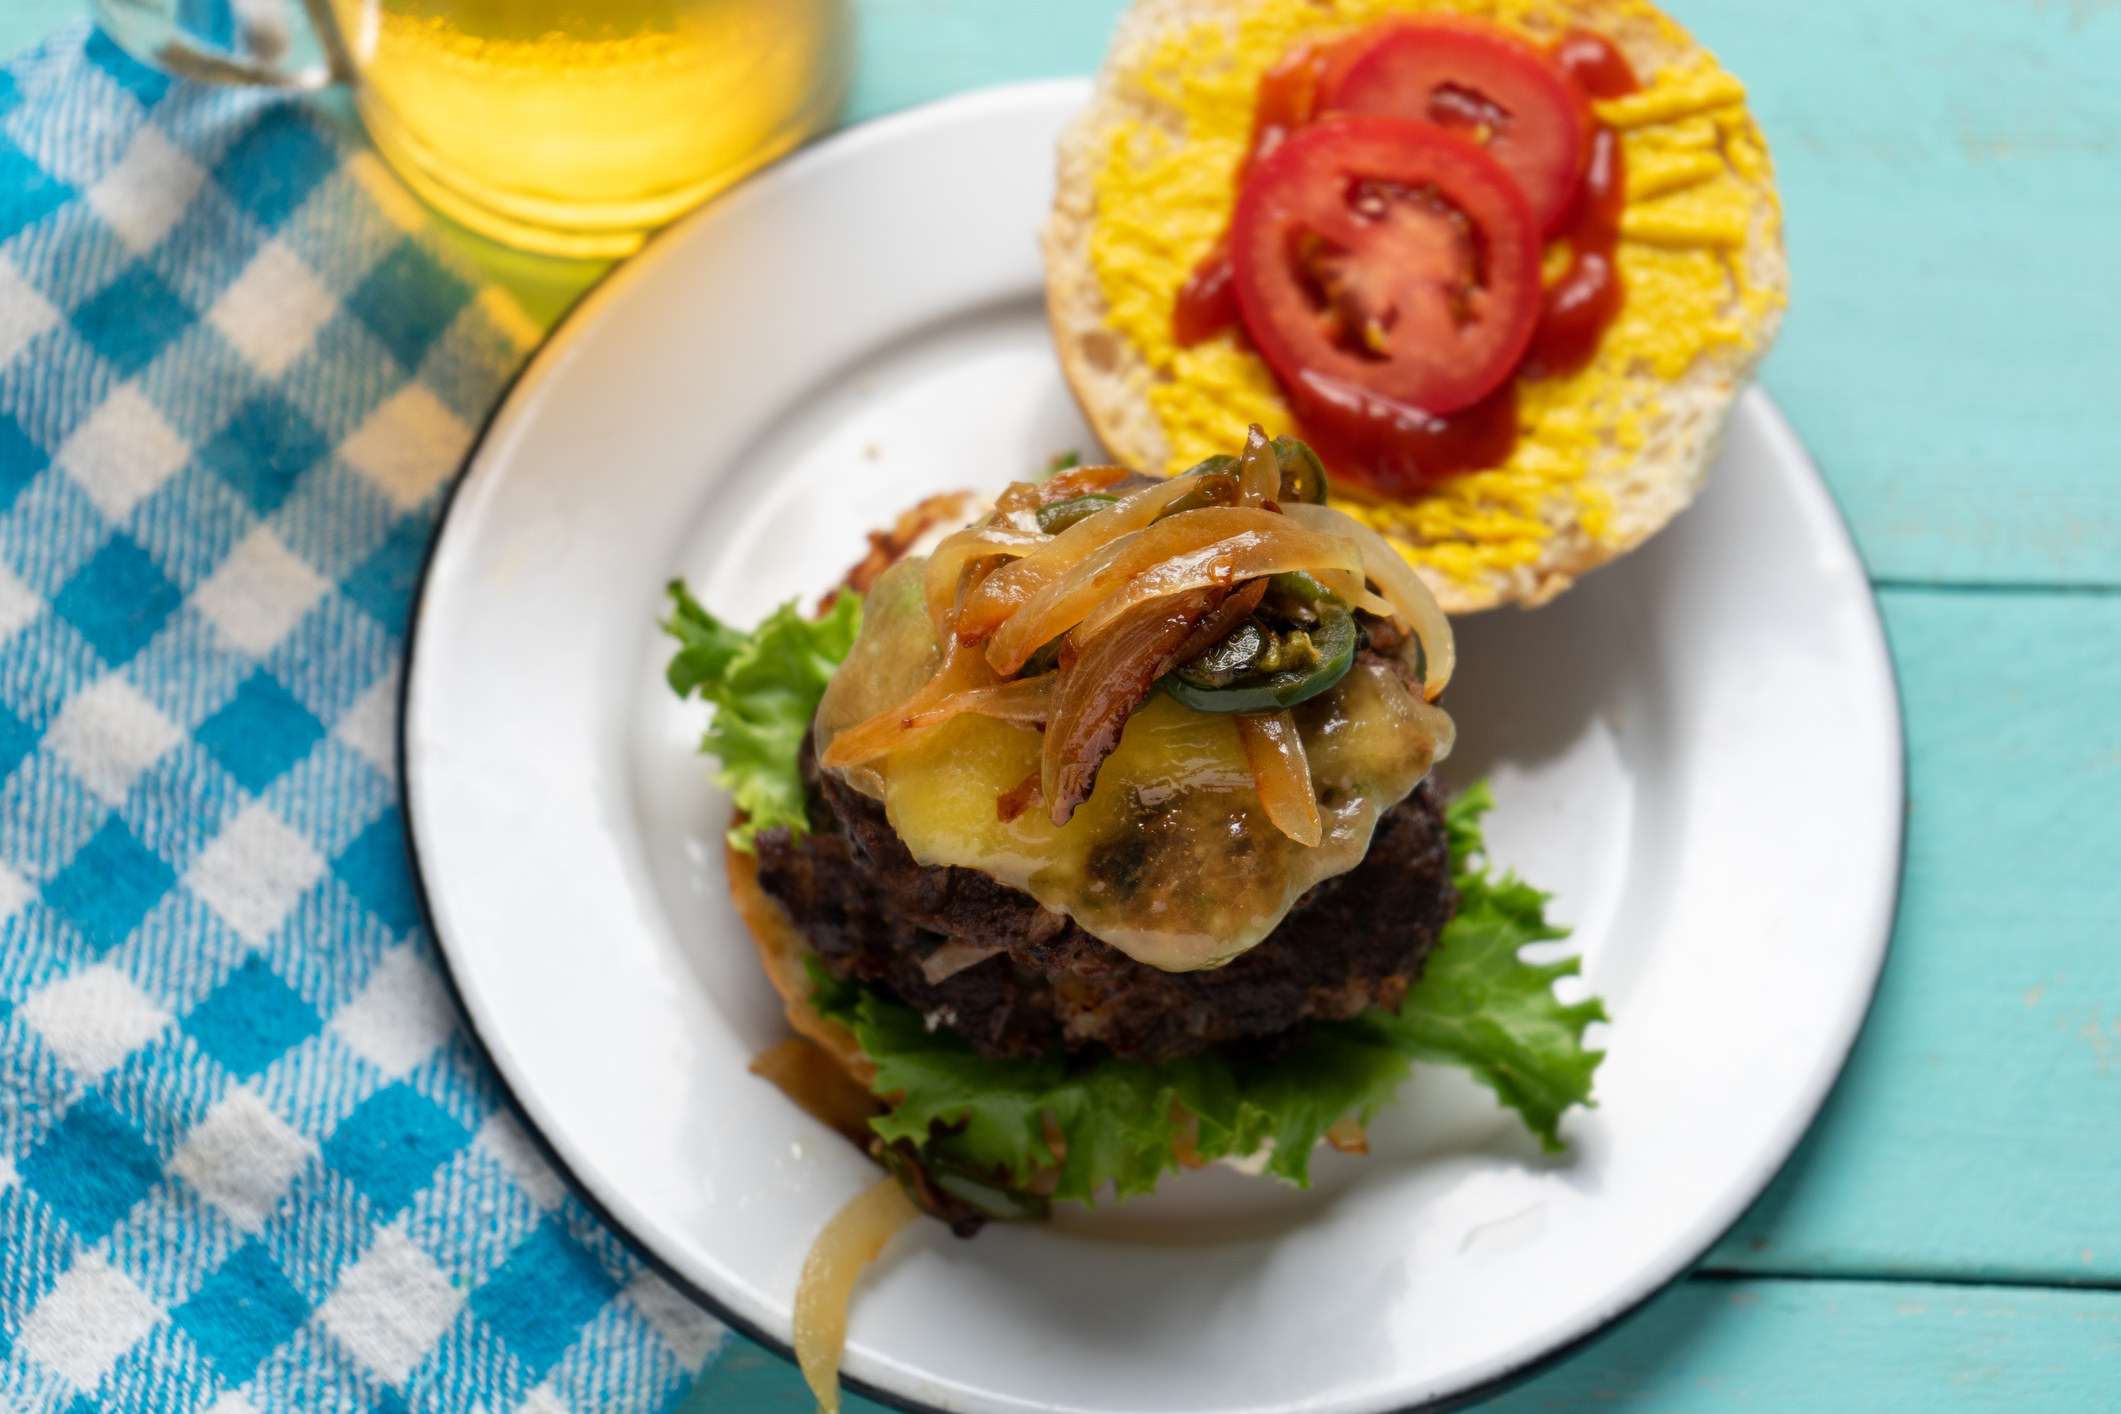 Cheese burger with caramelized onions